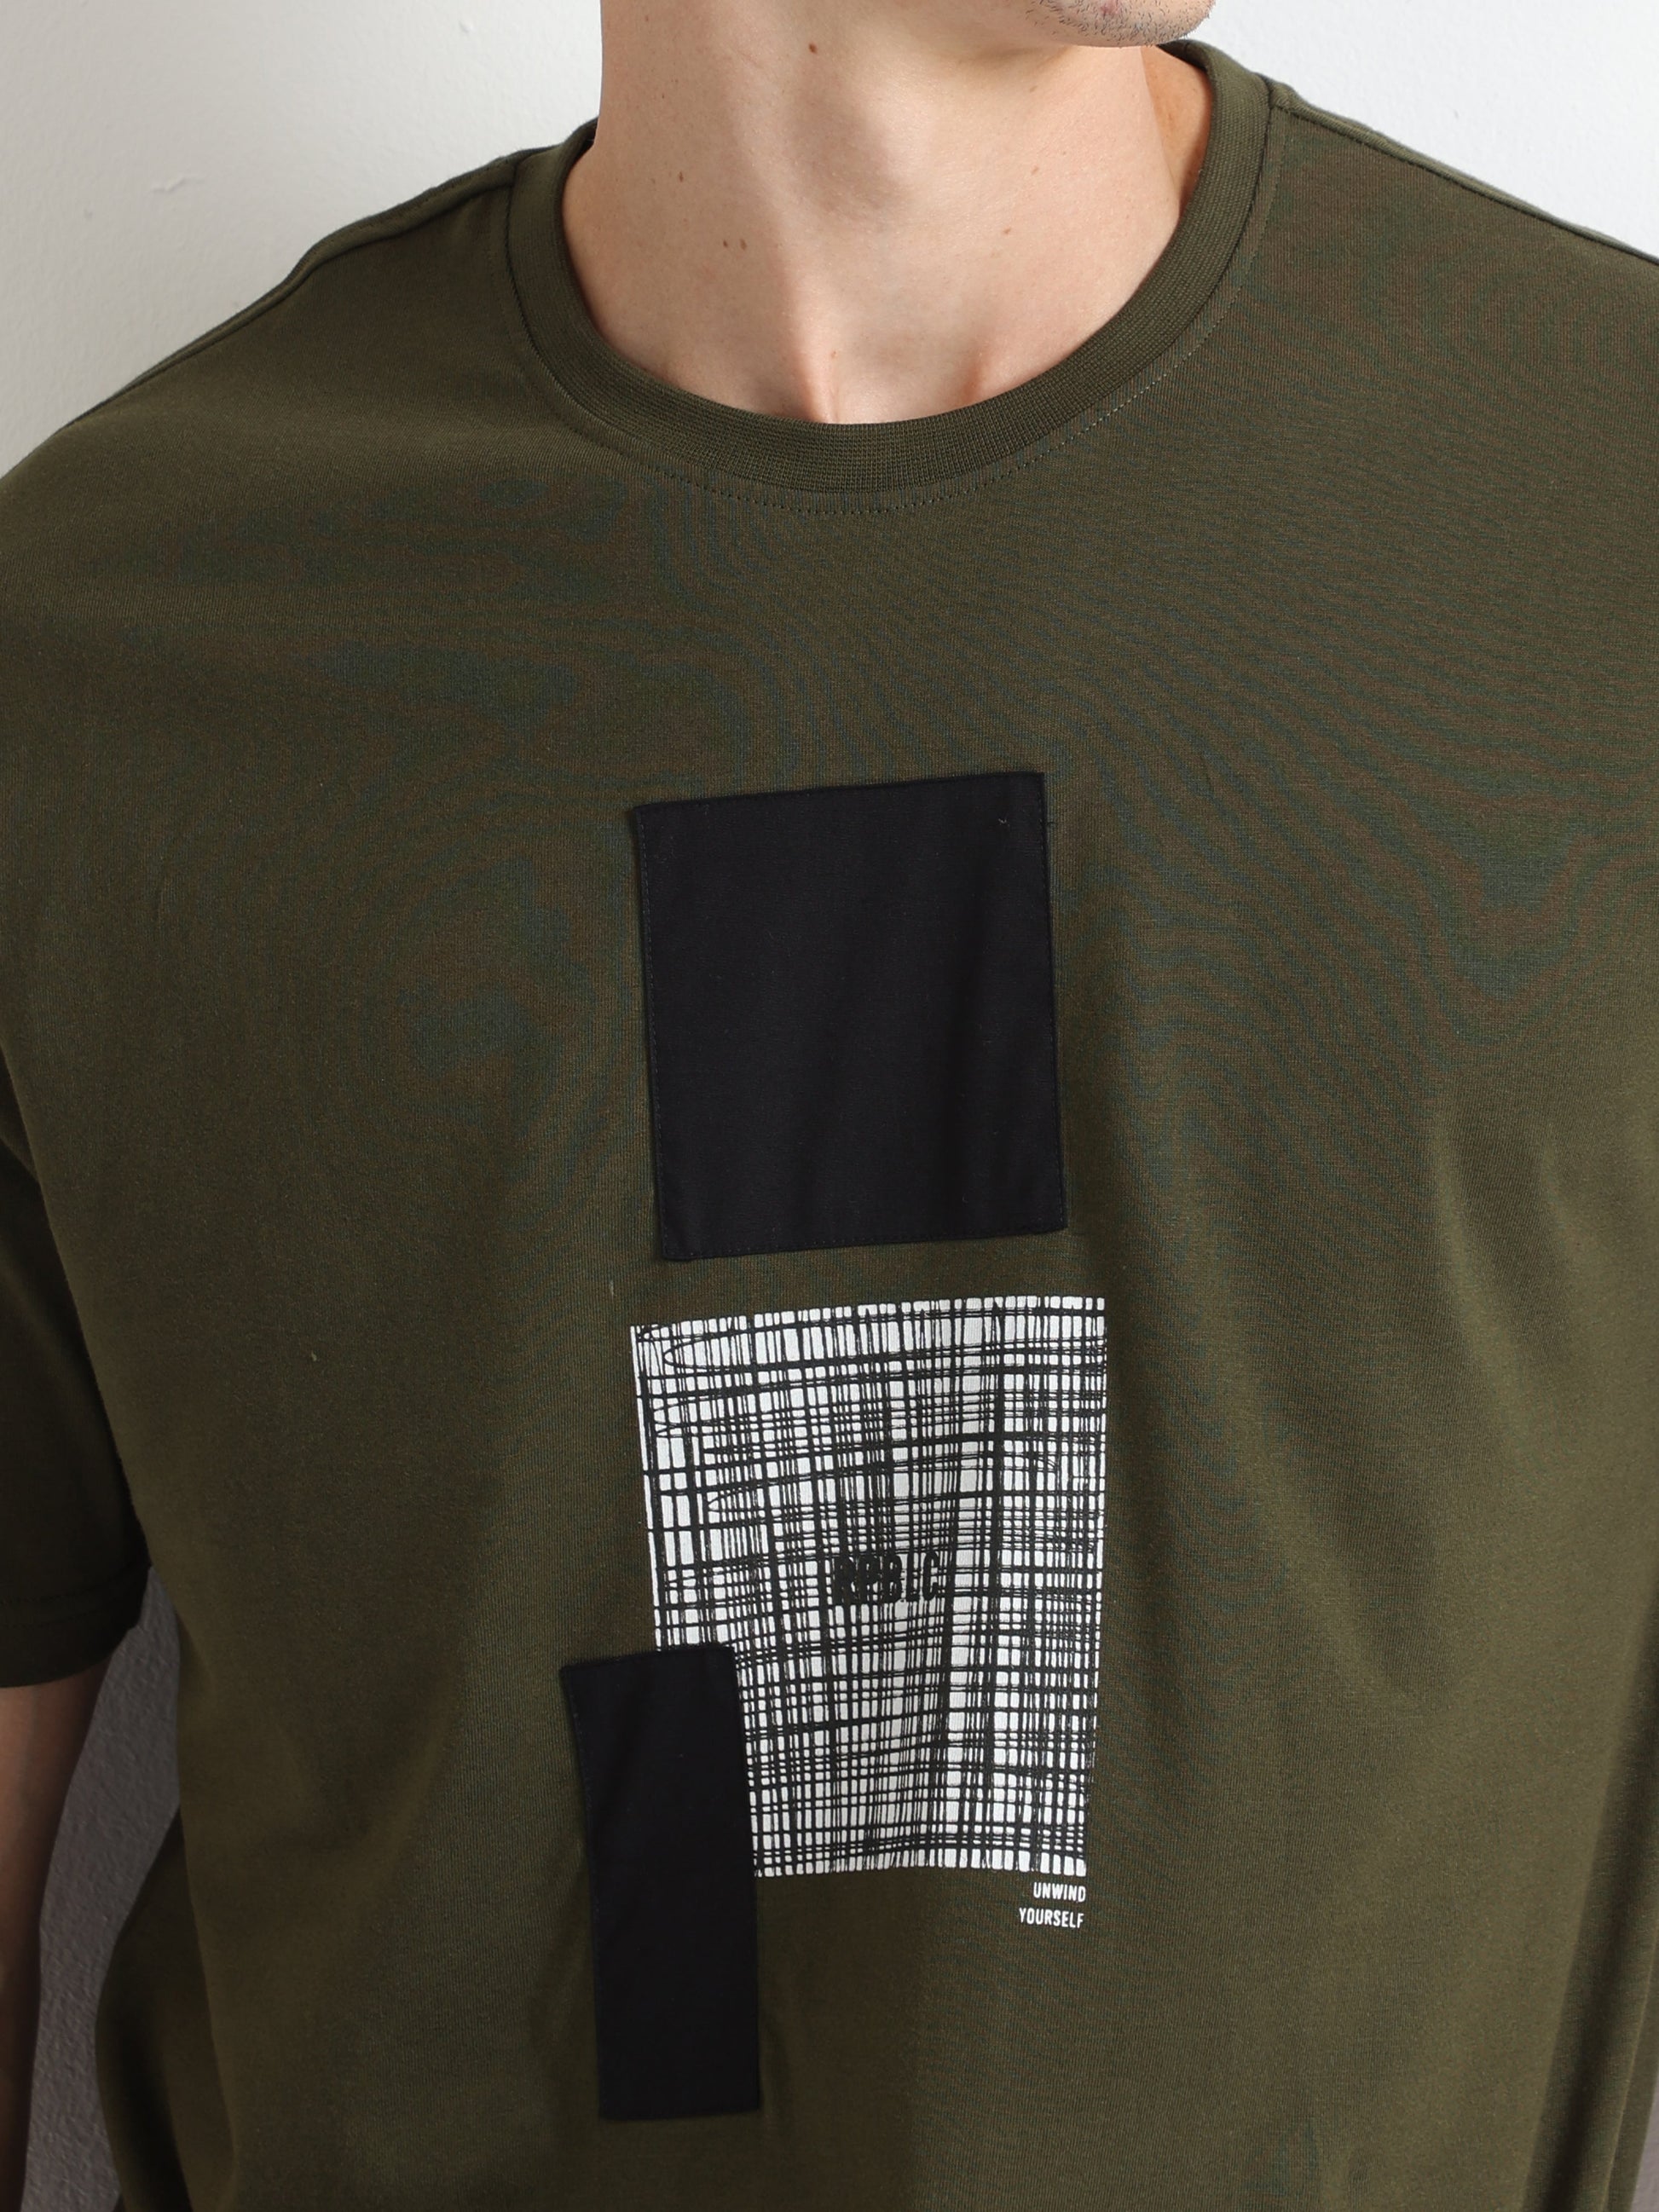 Olive Crew Neck Chest Graphic Printed T Shirt